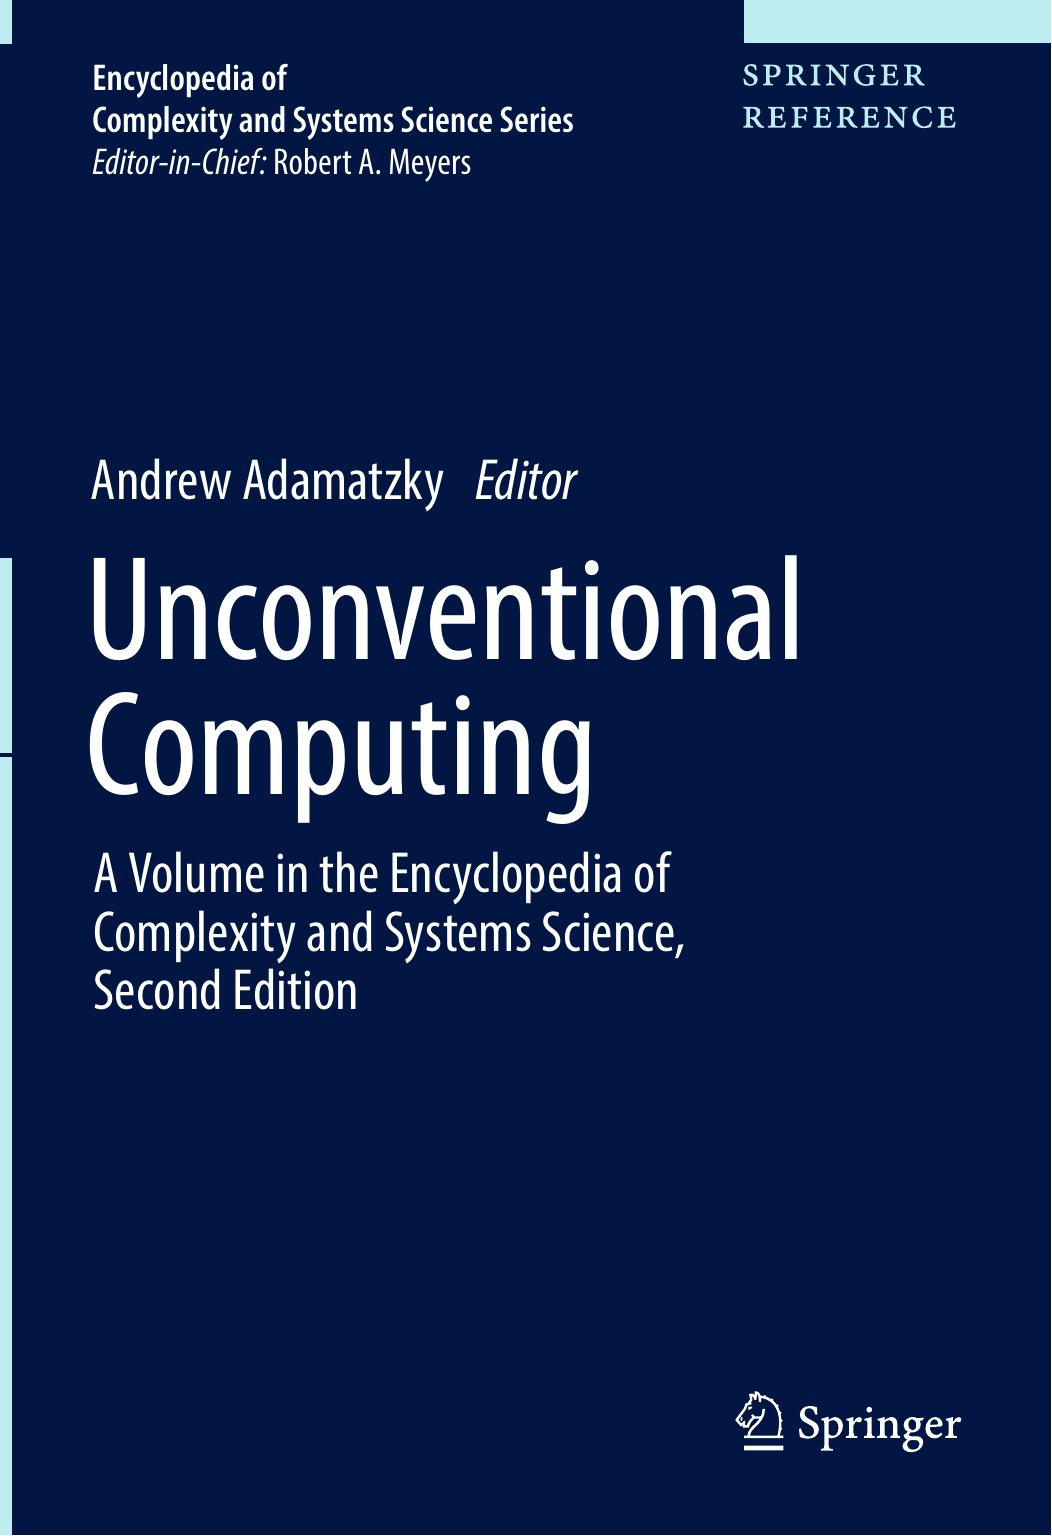 Unconventional Computing: A Volume in the Encyclopedia of Complexity and Systems Science, Second Edition